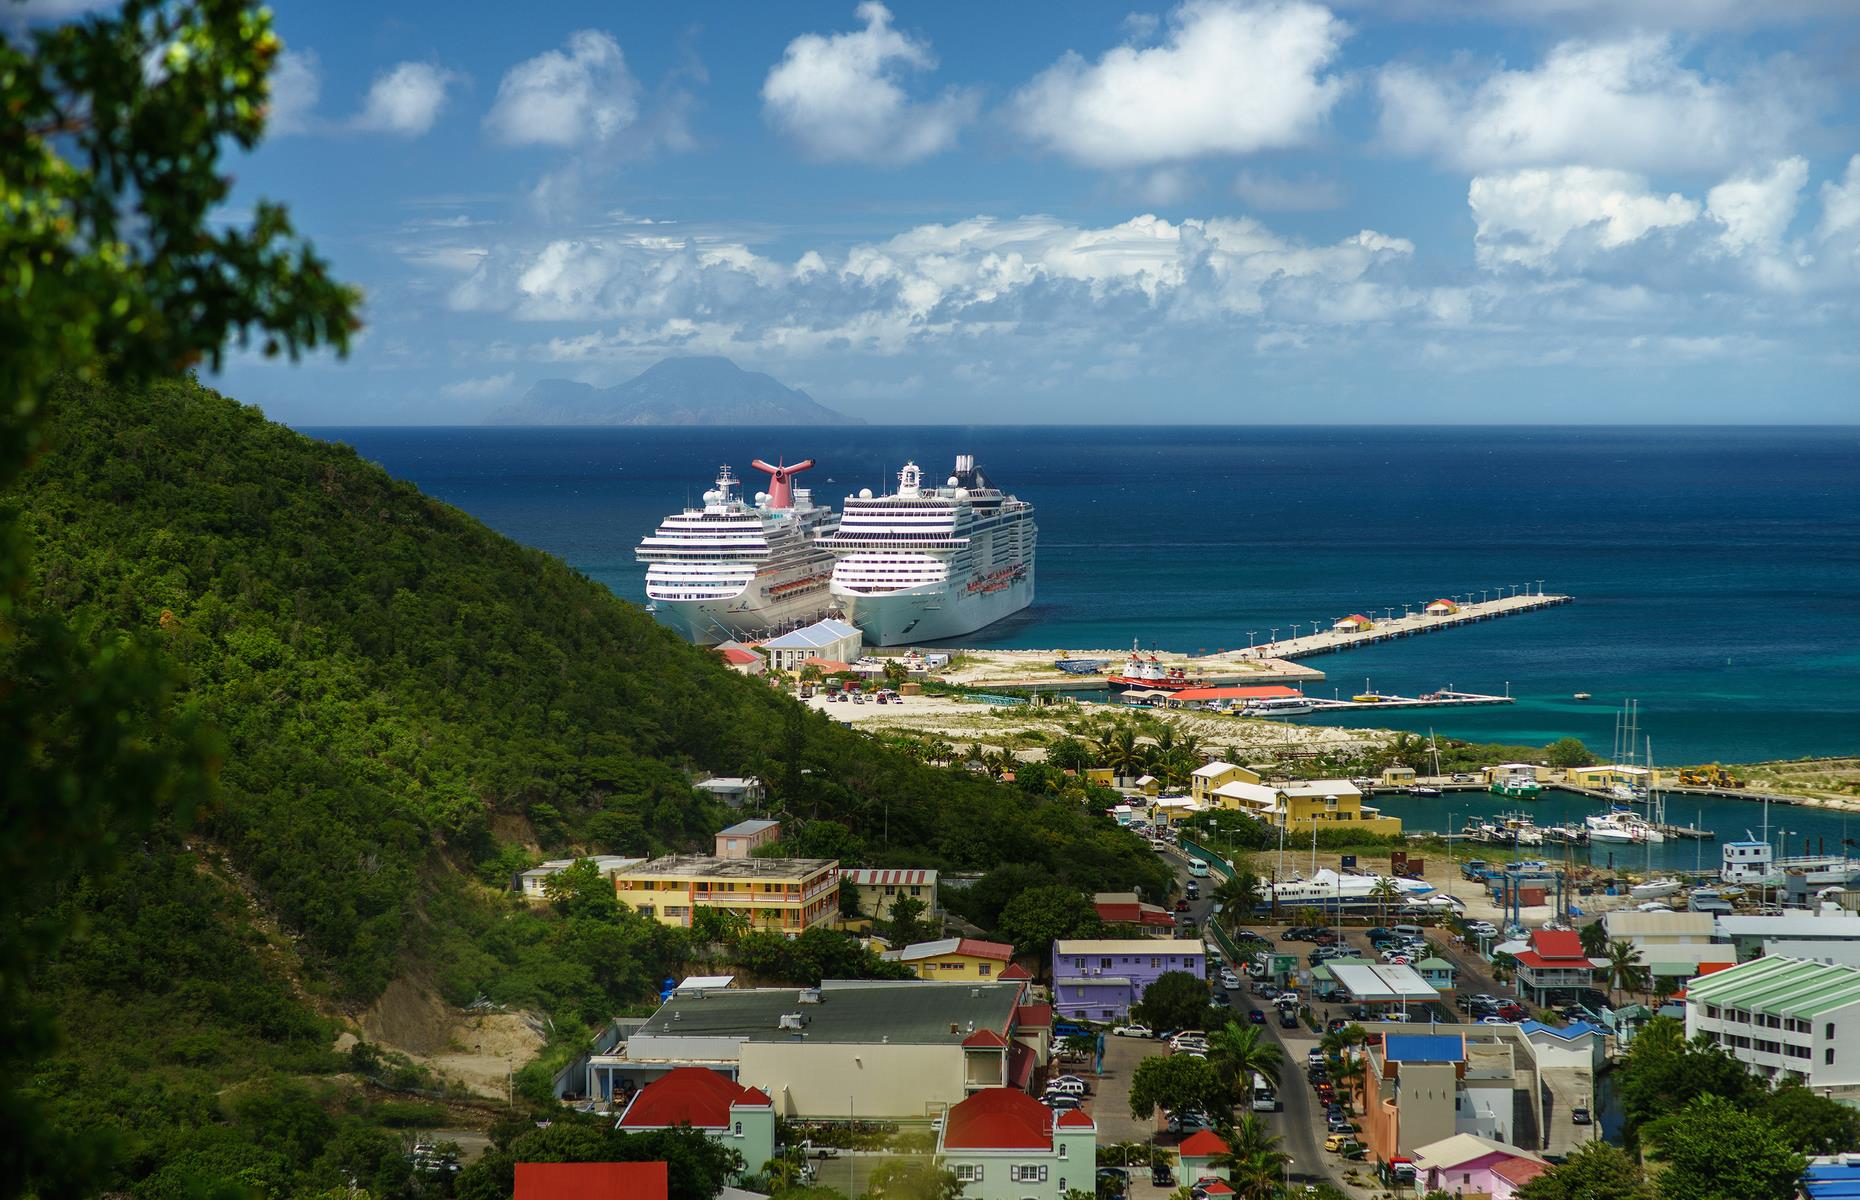 <p>Passengers are immediately welcomed to Harbour Point Village when they arrive ashore on the small island of St. Maarten, affectionately known as "the Friendly Island". The island’s colorful capital, Philipsburg, can be reached in 15 minutes on foot. This town has plenty of Dutch charm, great shopping in the form of duty-free outlets, souvenir shops and market stalls, as well as bars and restaurants. There are plenty of watersports available too. This beautiful island is visited by Carnival, Costa, Disney Cruise Line, Princess,  P&O, NCL and HAL, to name a few.</p>